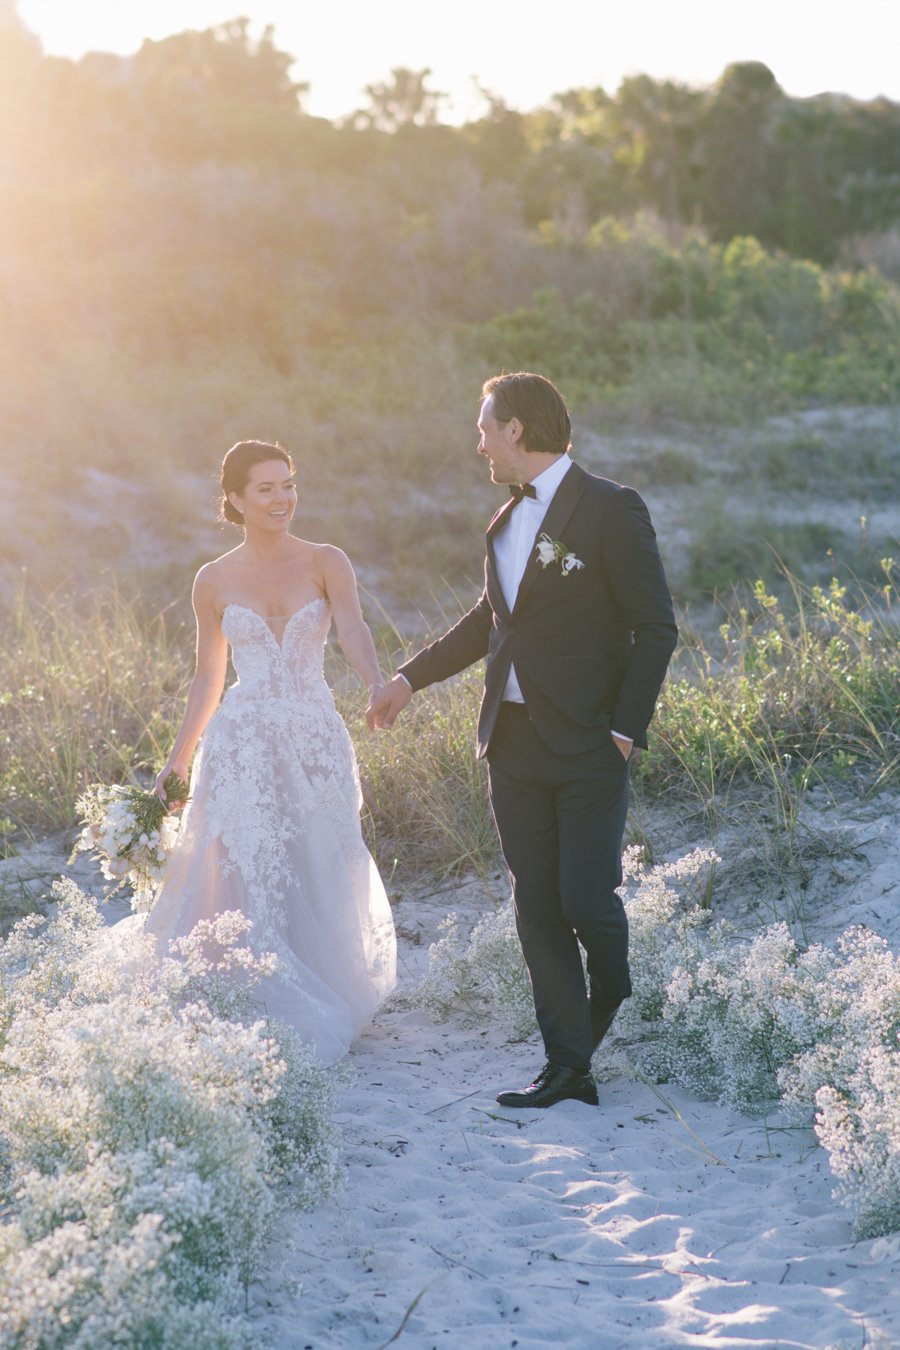 Wedding Photography Tips for a Timeless and Memorable Wedding Day